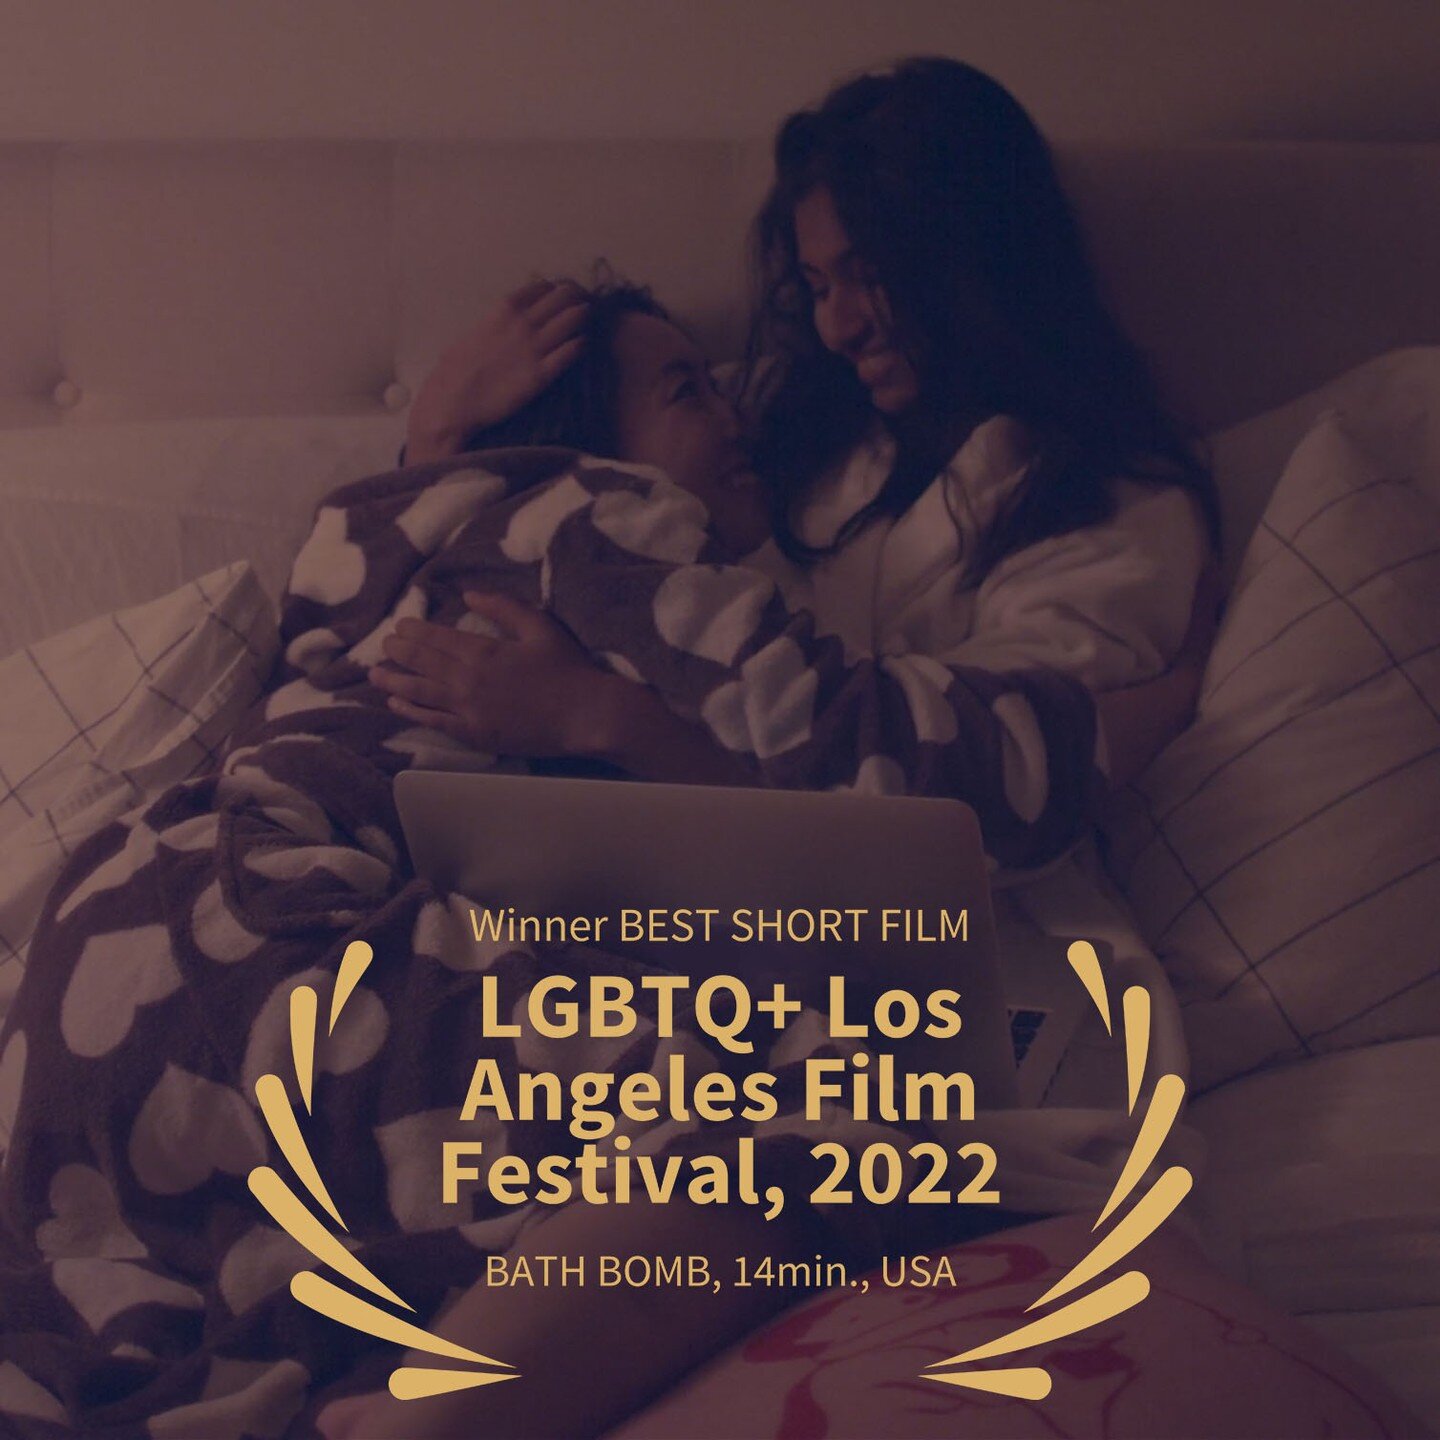 Hey all!!

Bath Bomb won &quot;Best Short&quot; at the LGBTQ+ Los Angeles film festival and will be screening next Monday April 11th on the wildsound.ca website! Make sure to sign up for a free trial before then so you can watch! 

Matthew Toffolo, t